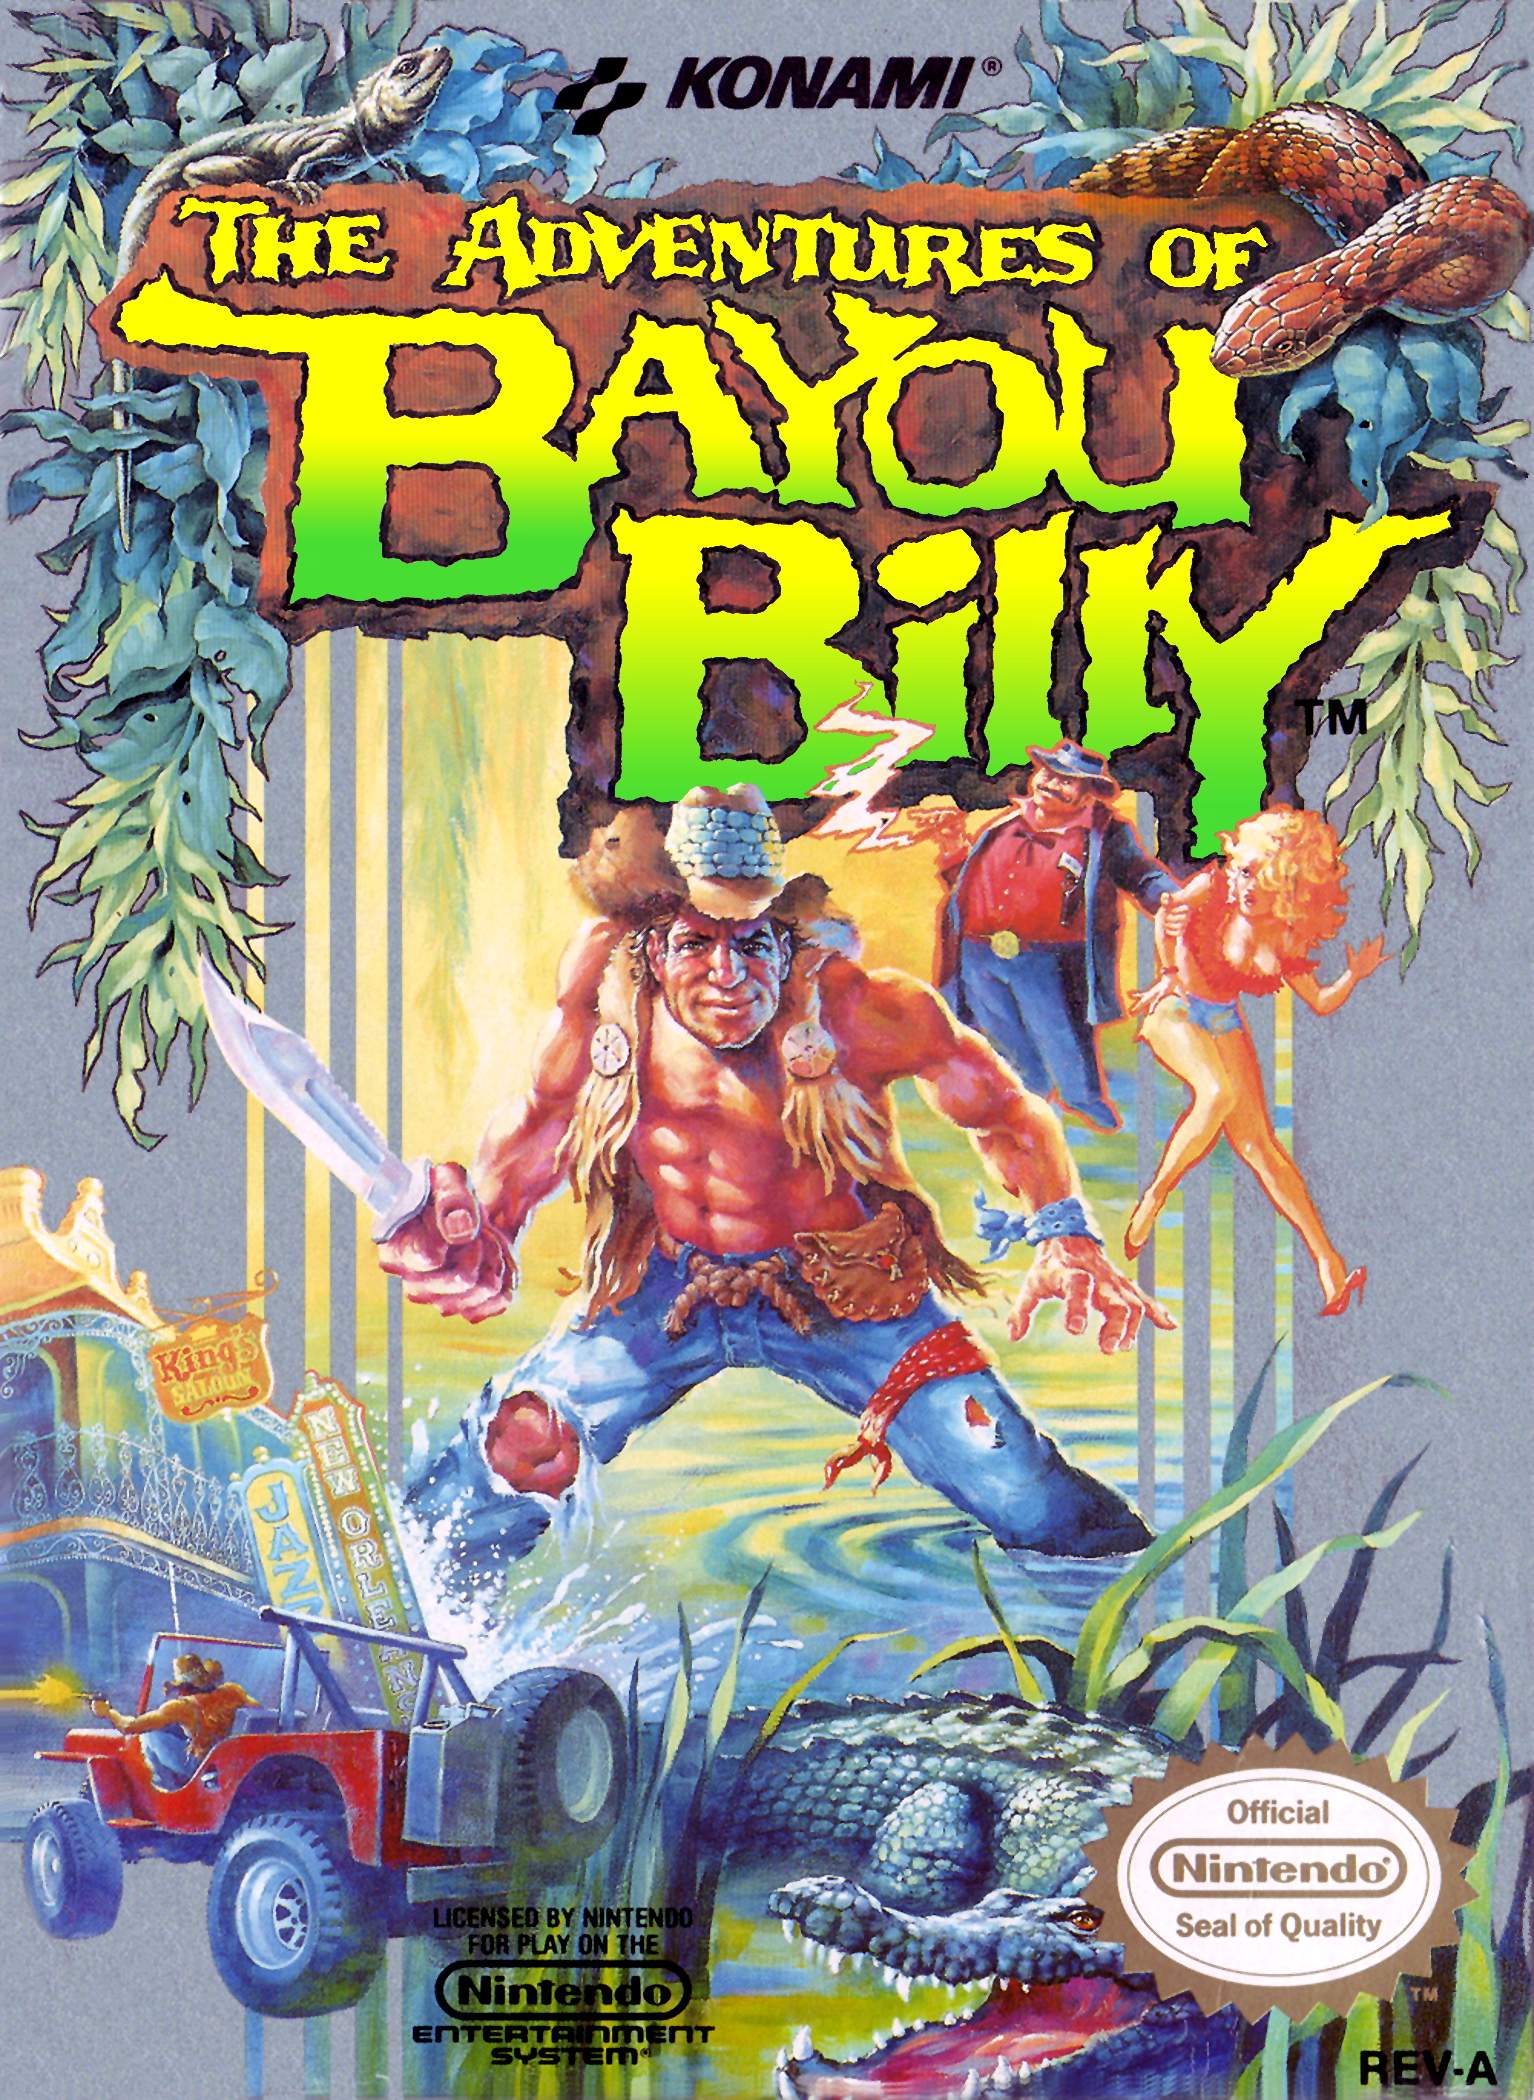 The Adventures of Bayou Billy - Authentic NES Game Cartridge